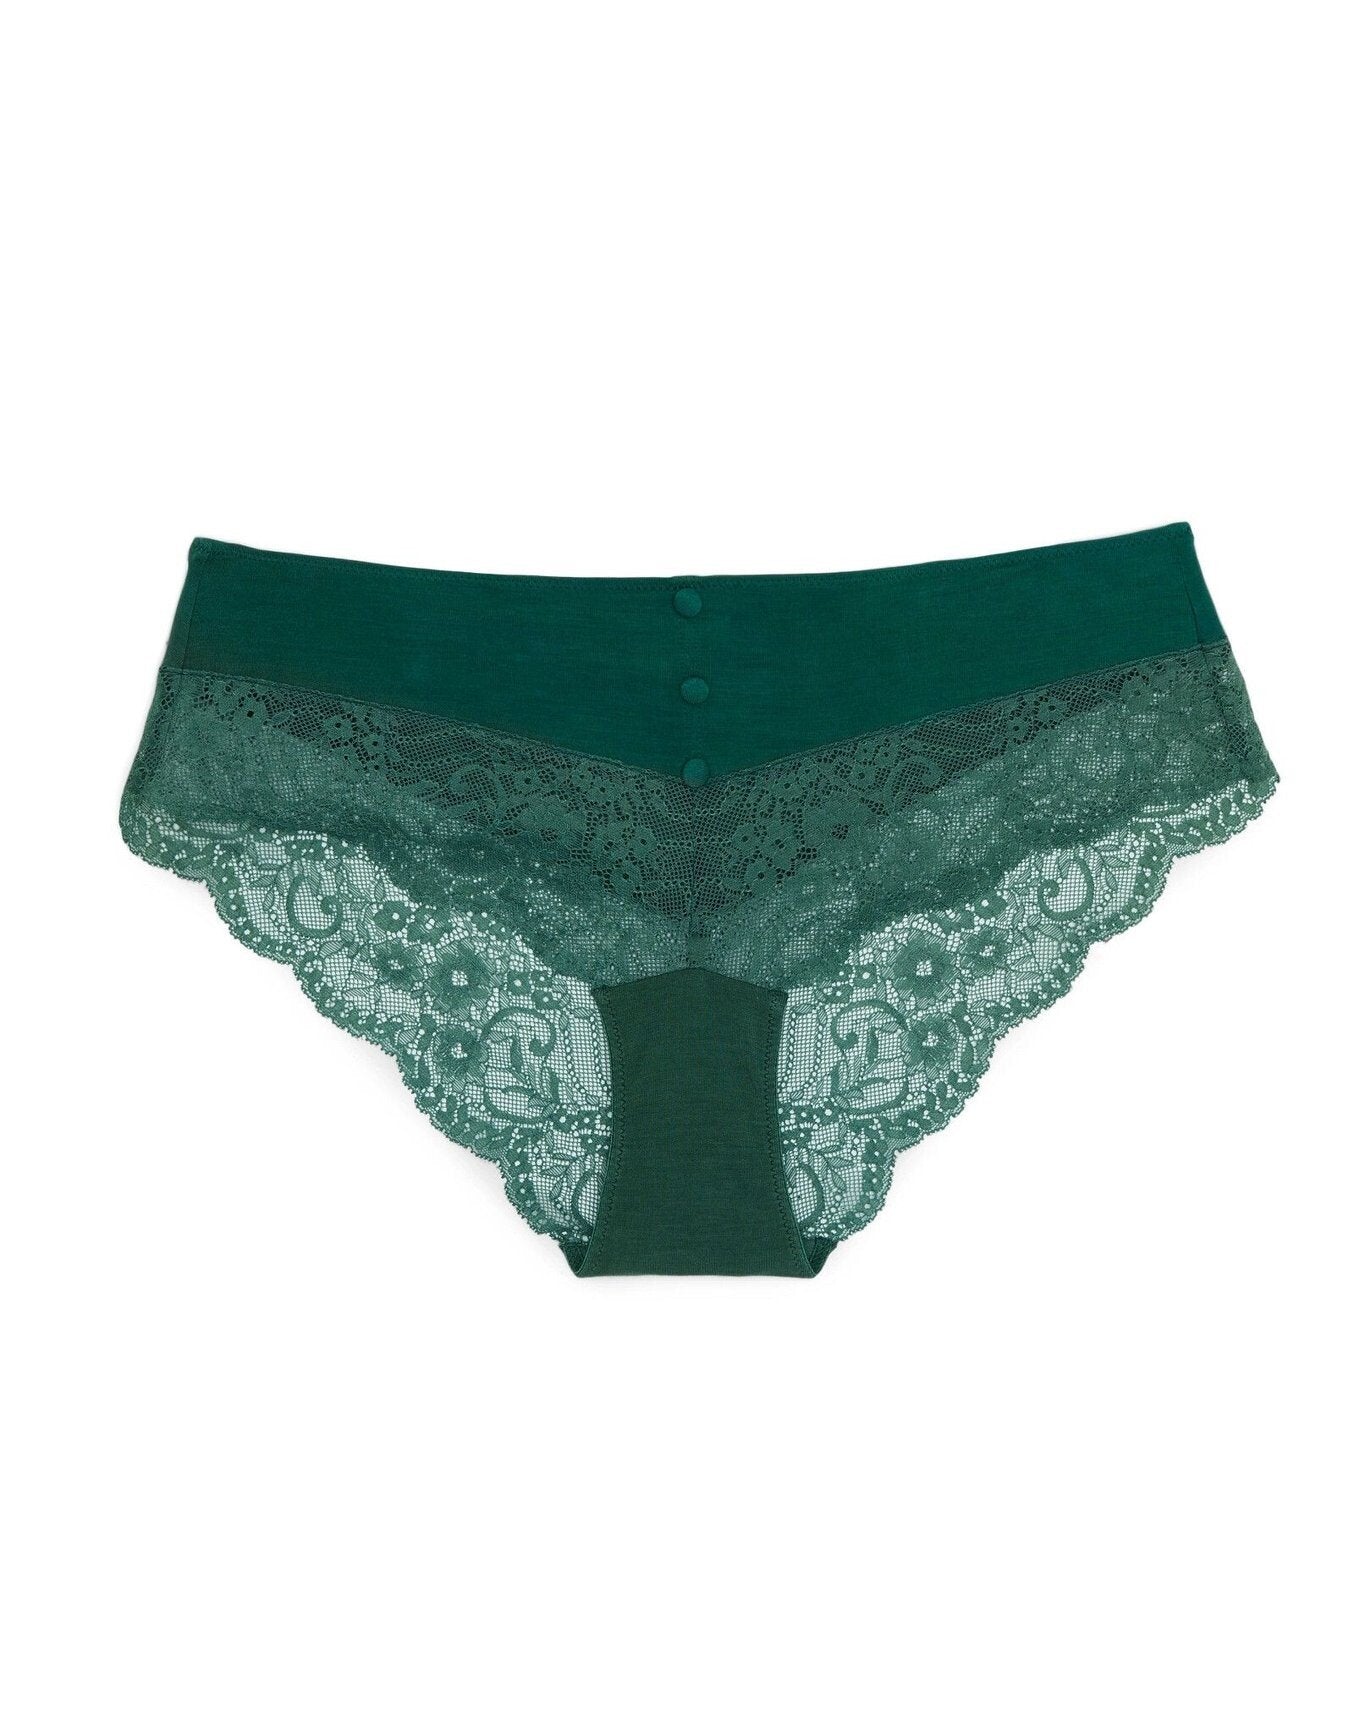 Adore Me Anja Hipster in color Trekking Green and shape hipster